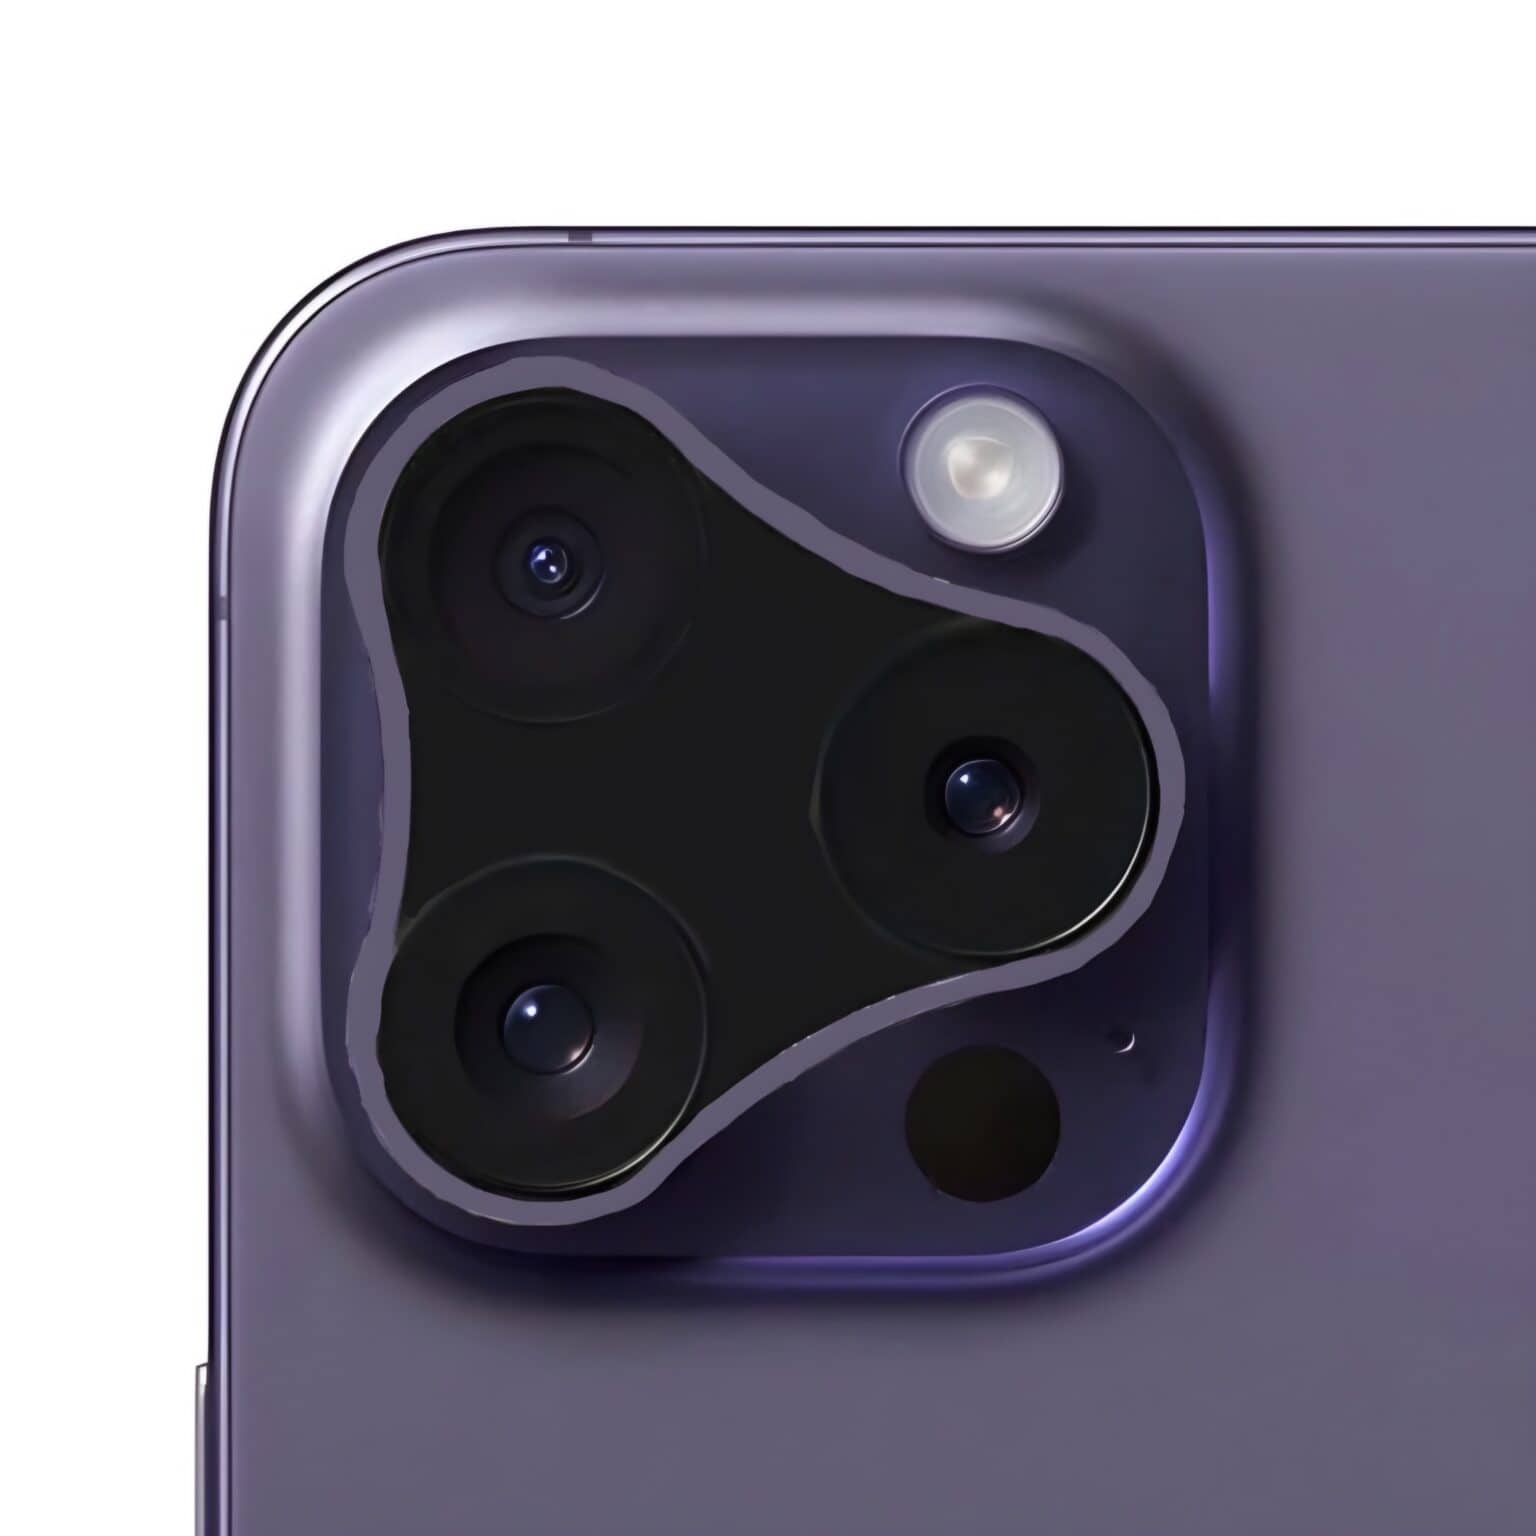 A mockup illustrates the latest iPhone 16 Pro camera rumor with a camera module that looks like a tricorne hat.